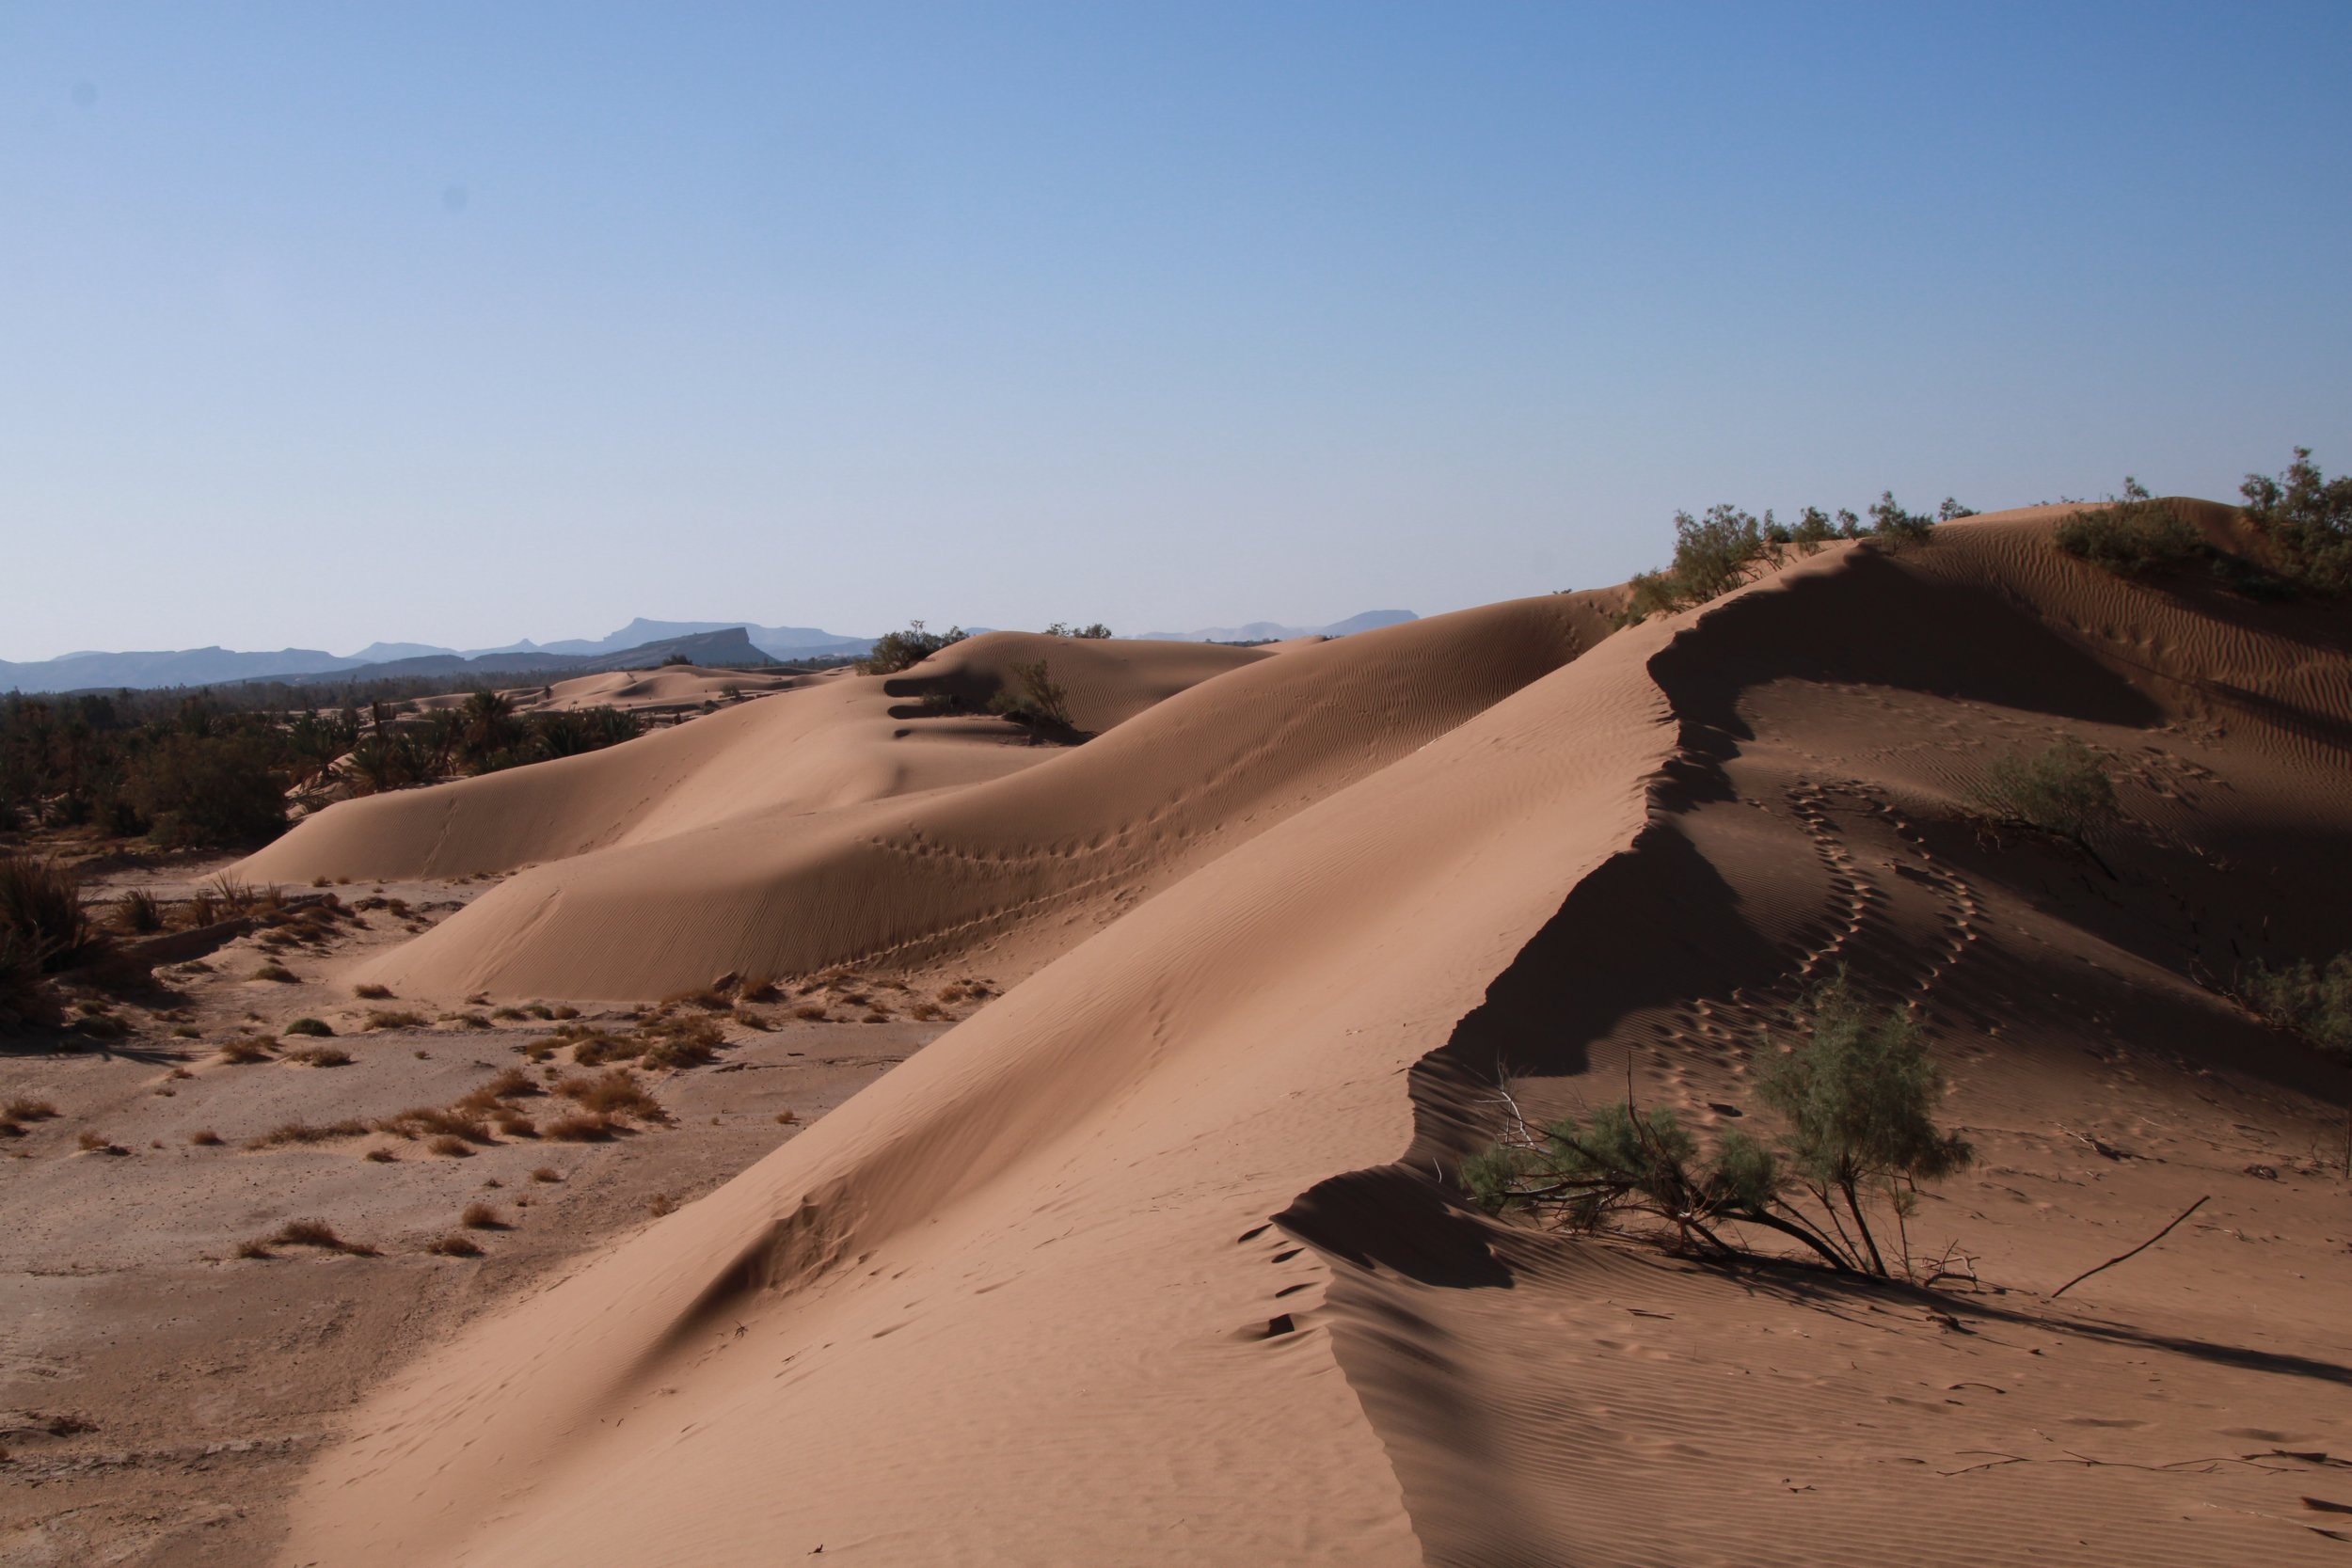  PICTURED: An unnamed stretch of desert near Rissani. PC: Andrew Corbley © 